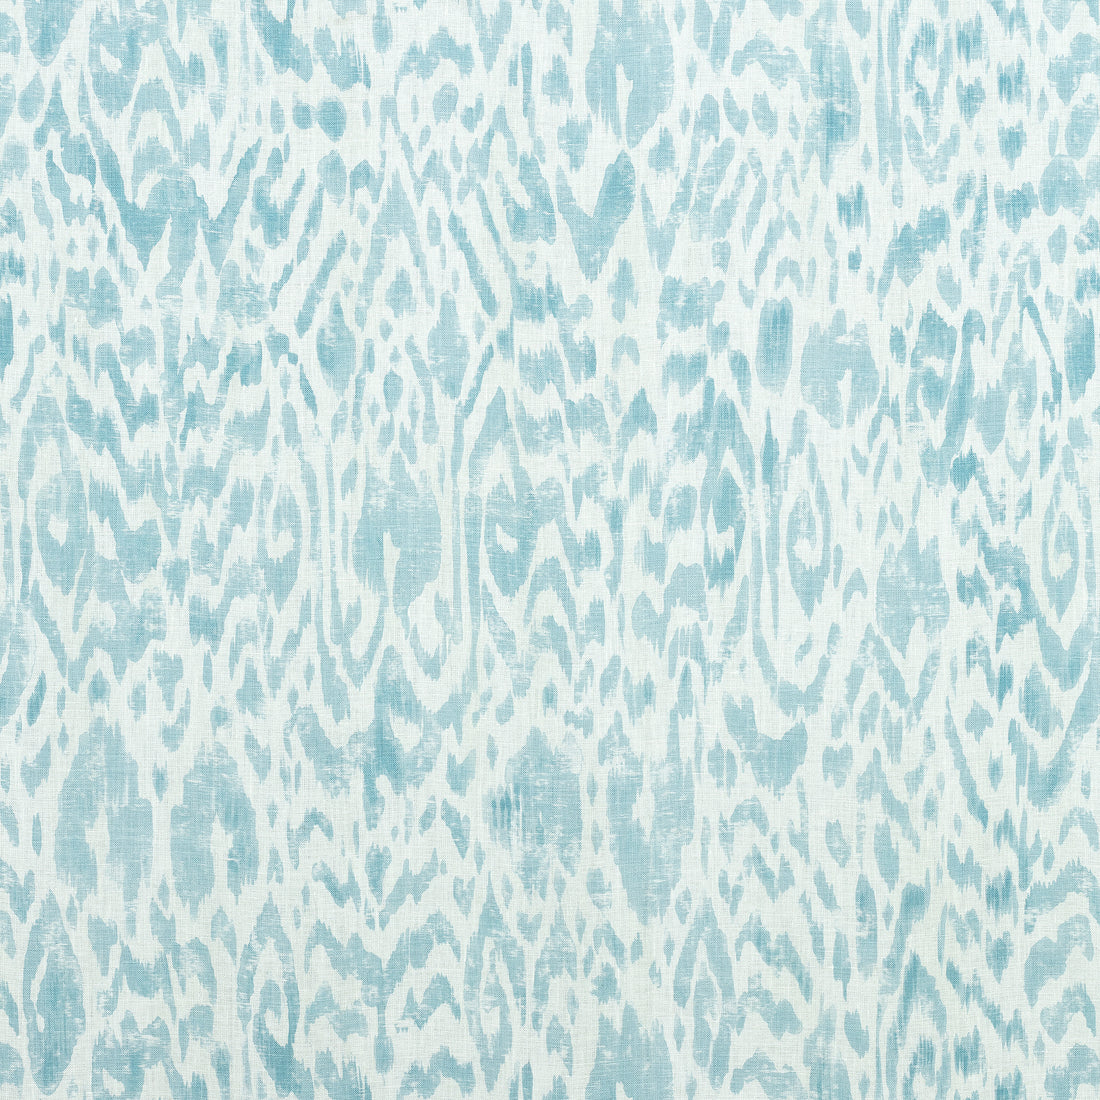 Carlotta fabric in aqua color - pattern number F975483 - by Thibaut in the Dynasty collection